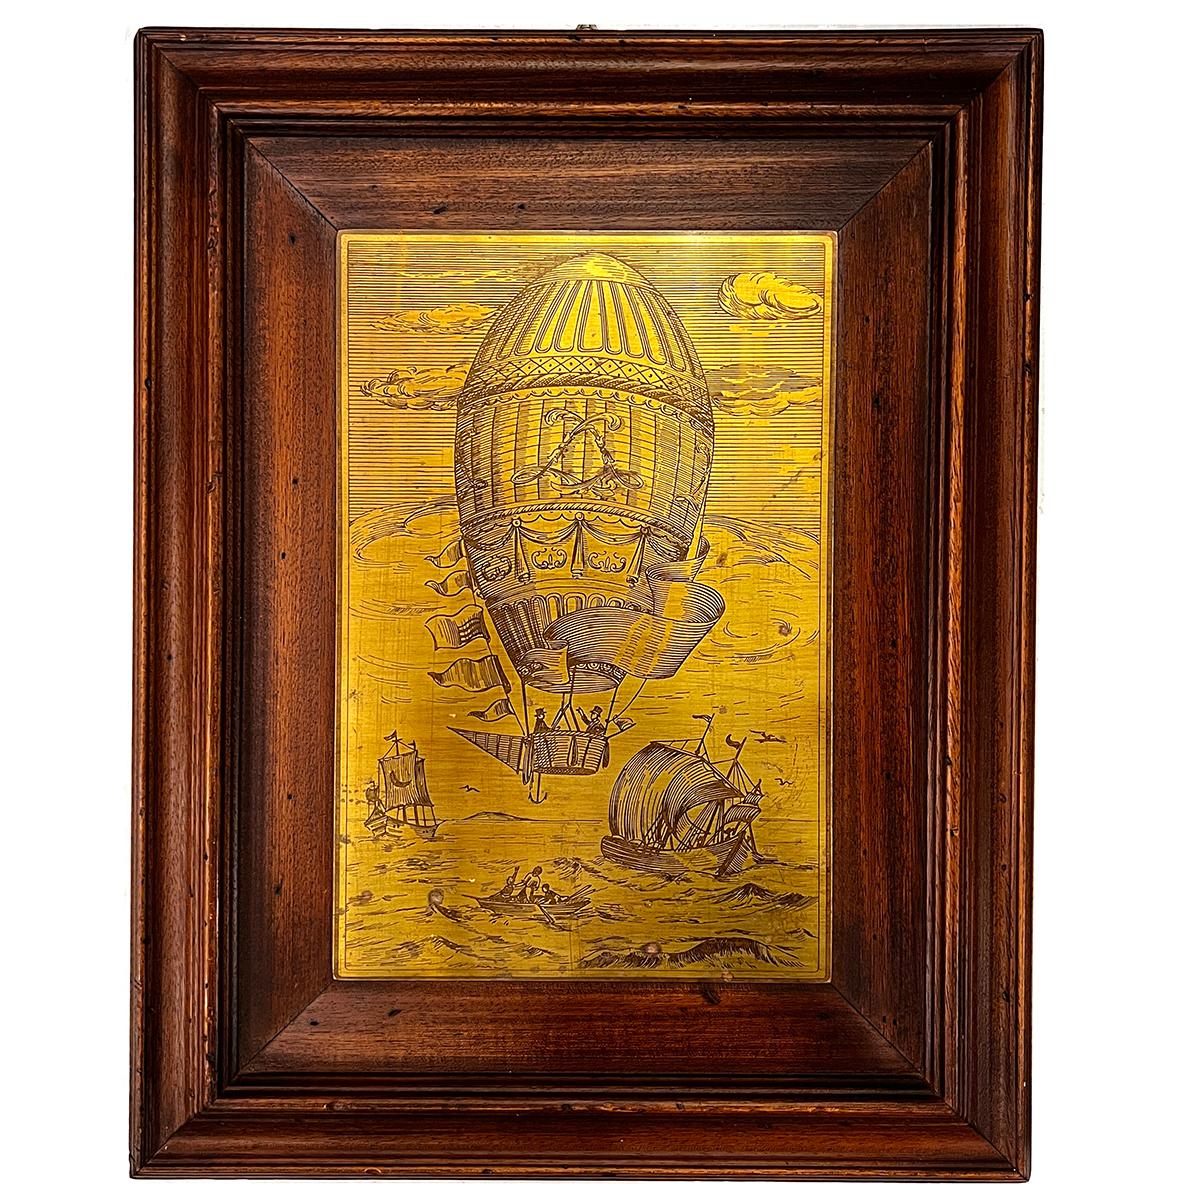 Pair of circa 1950s English Montgolfier etchings with wood frames.

Measurements:
Height: 18.75